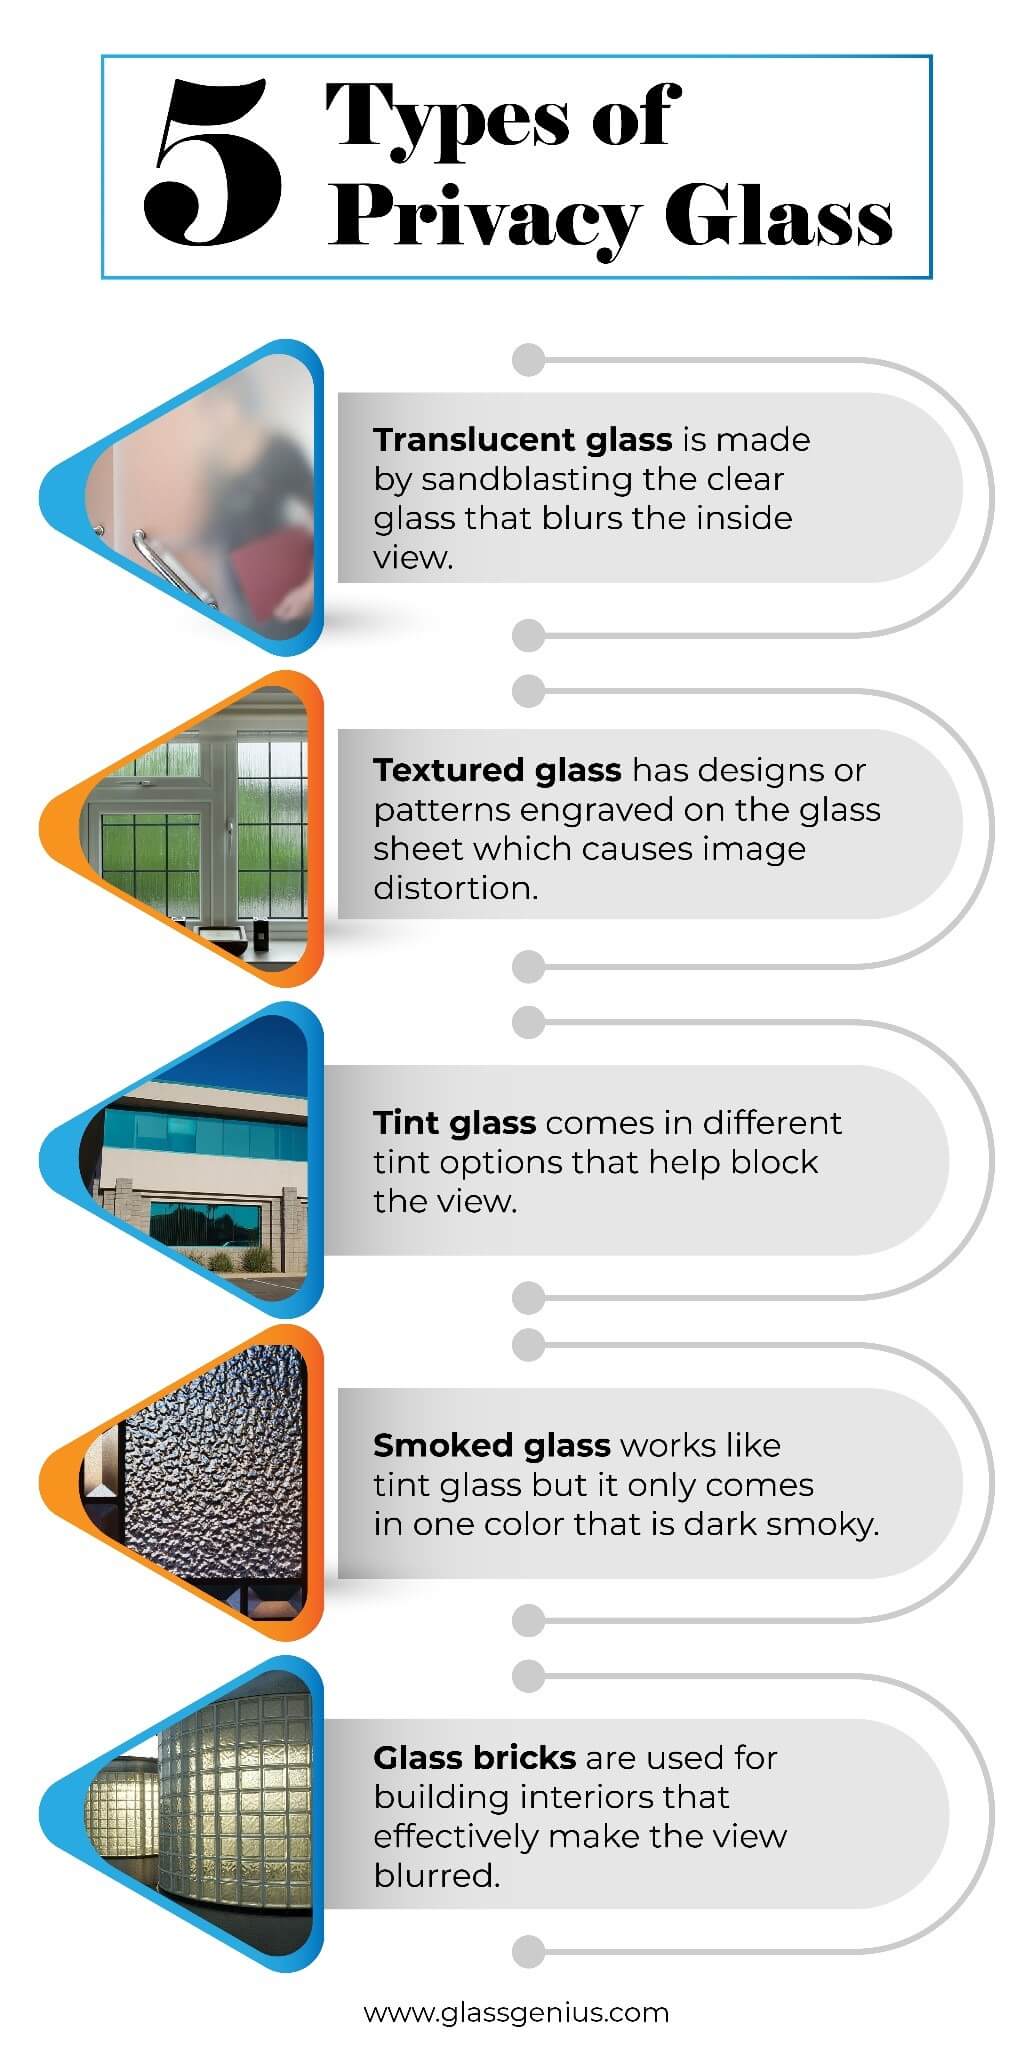 3 types of privacy glass windows you should know about